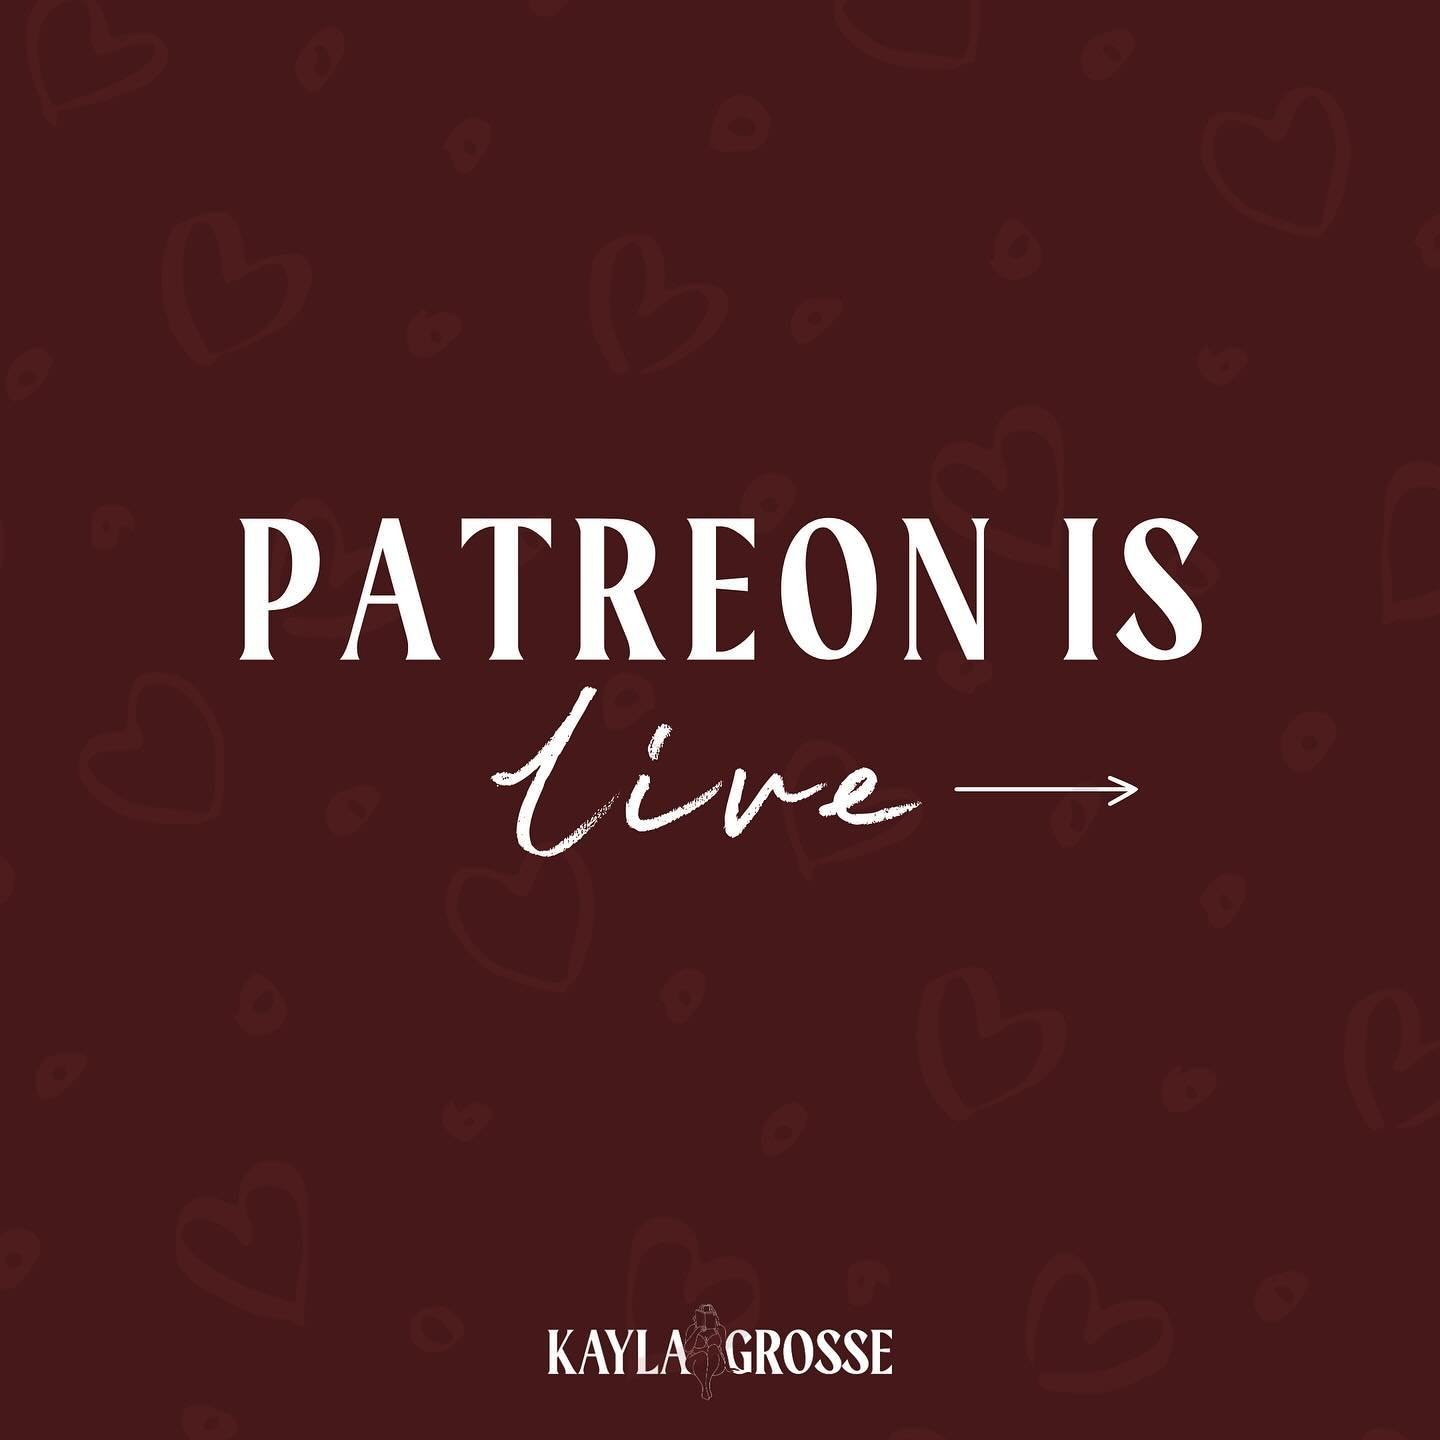 My Patreon is LIVE! ❤️

Inside The House of Smut you&rsquo;ll find:
* Bonus Chapters
* NSFW Artwork
* Voting Power on Character Names and Stories
* Private Discord
* Messages&hellip;.
And much more!

I hope you&rsquo;ll join me and support my plus-si